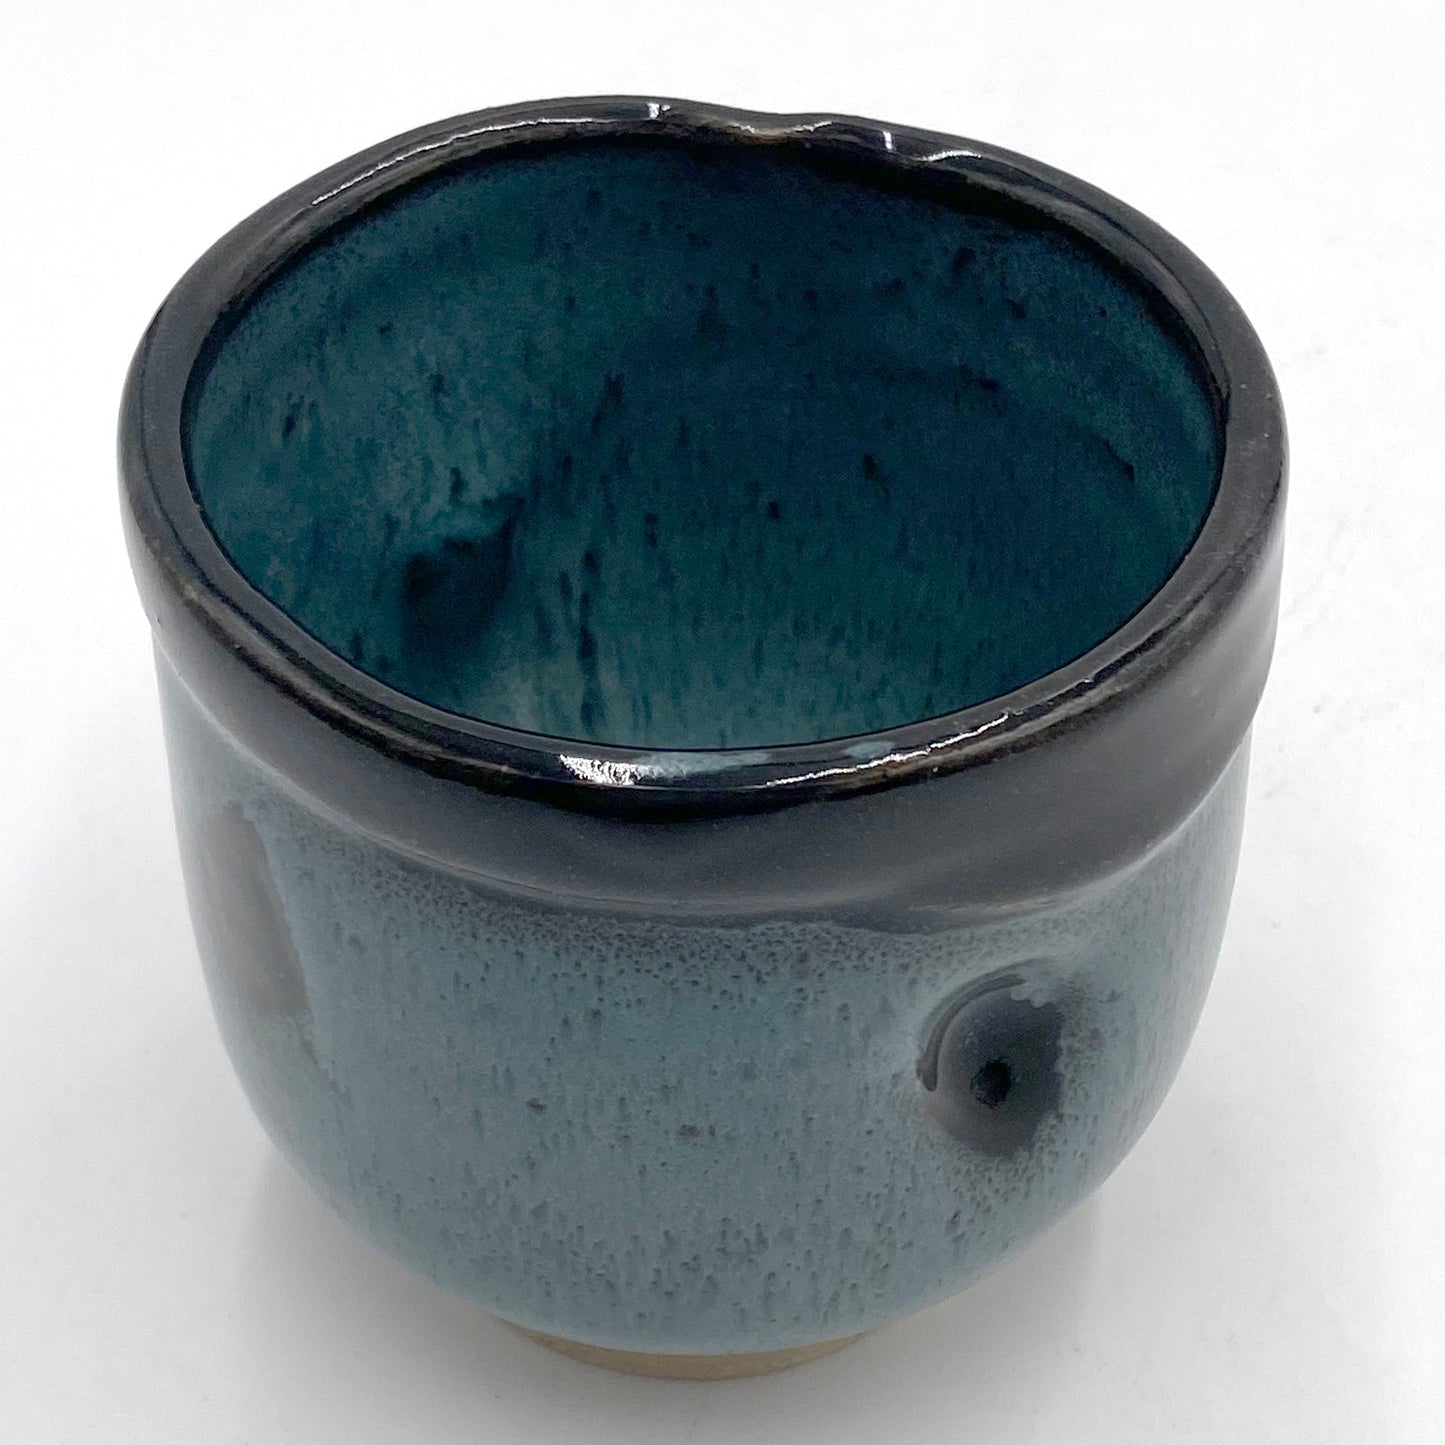 Turquoise and Black Cup #2